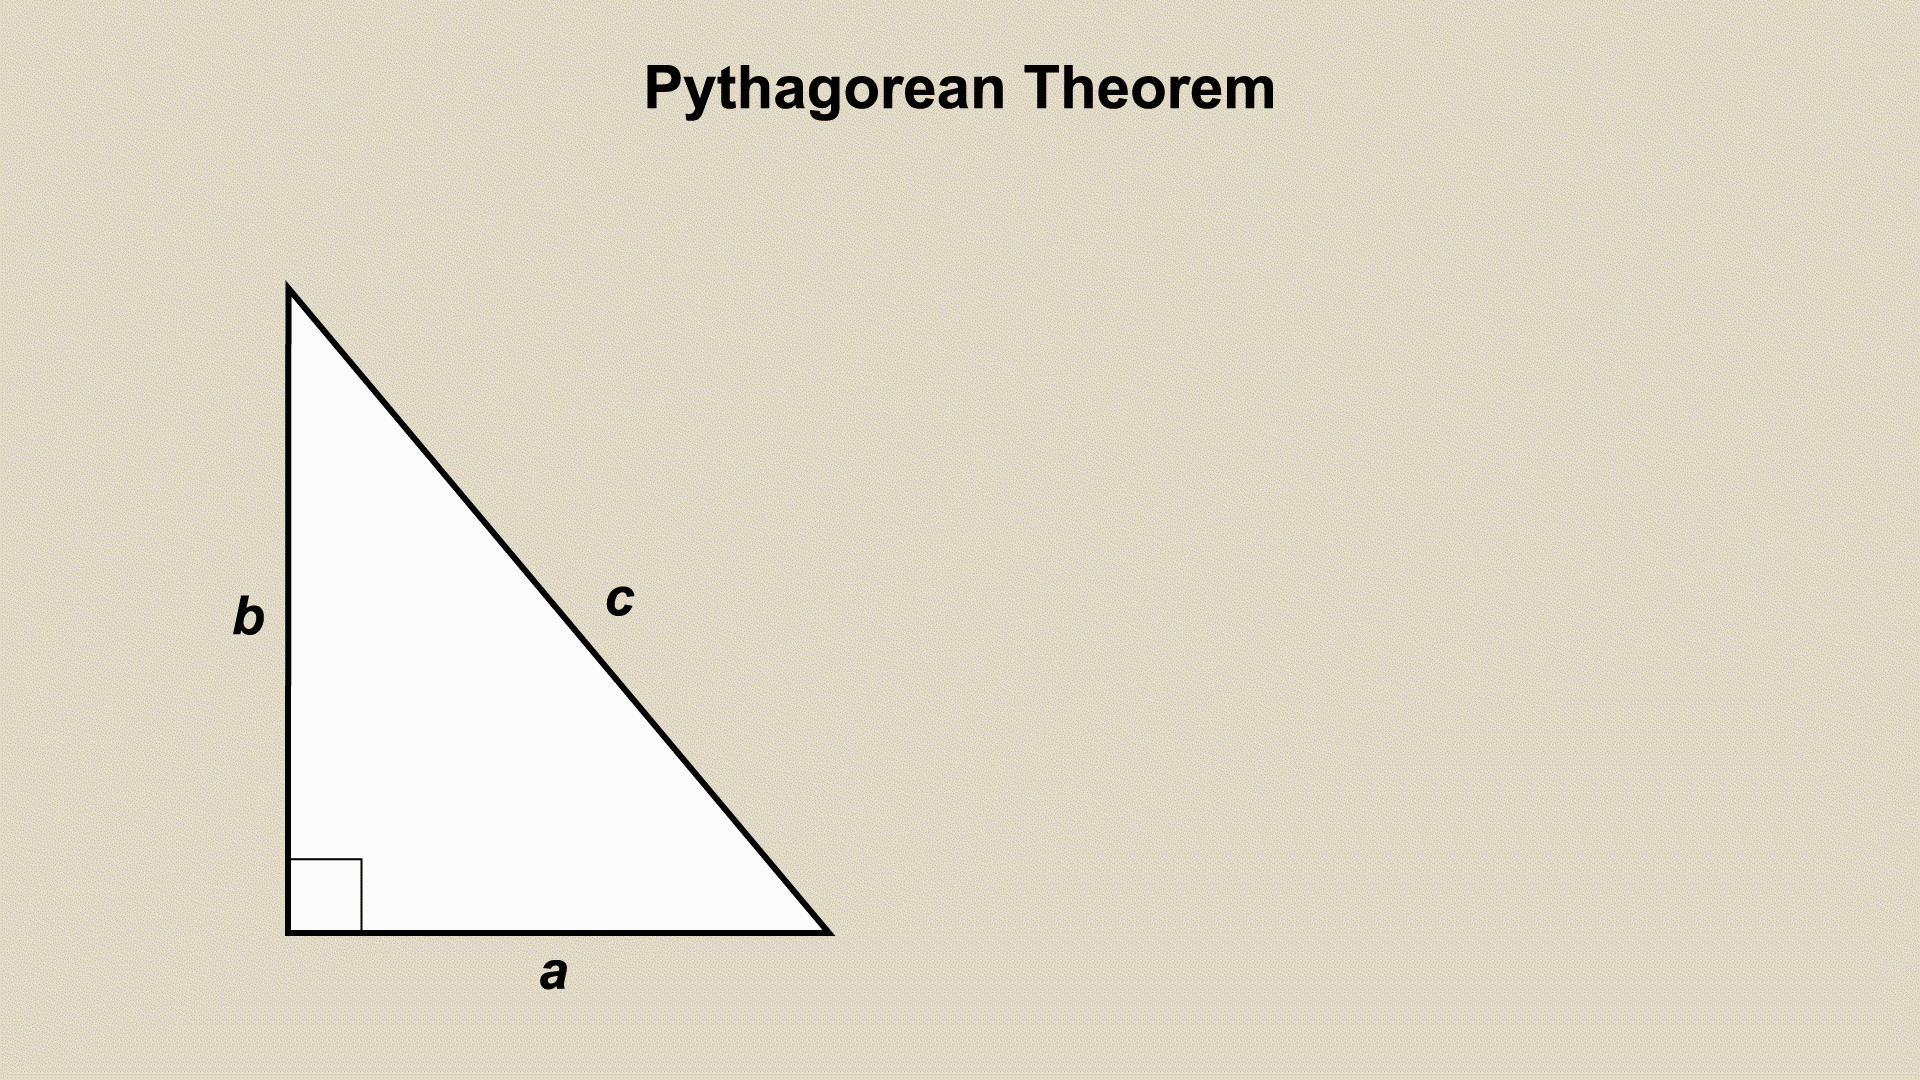 This piece of animated math clip art shows the Pythagorean Theorem.